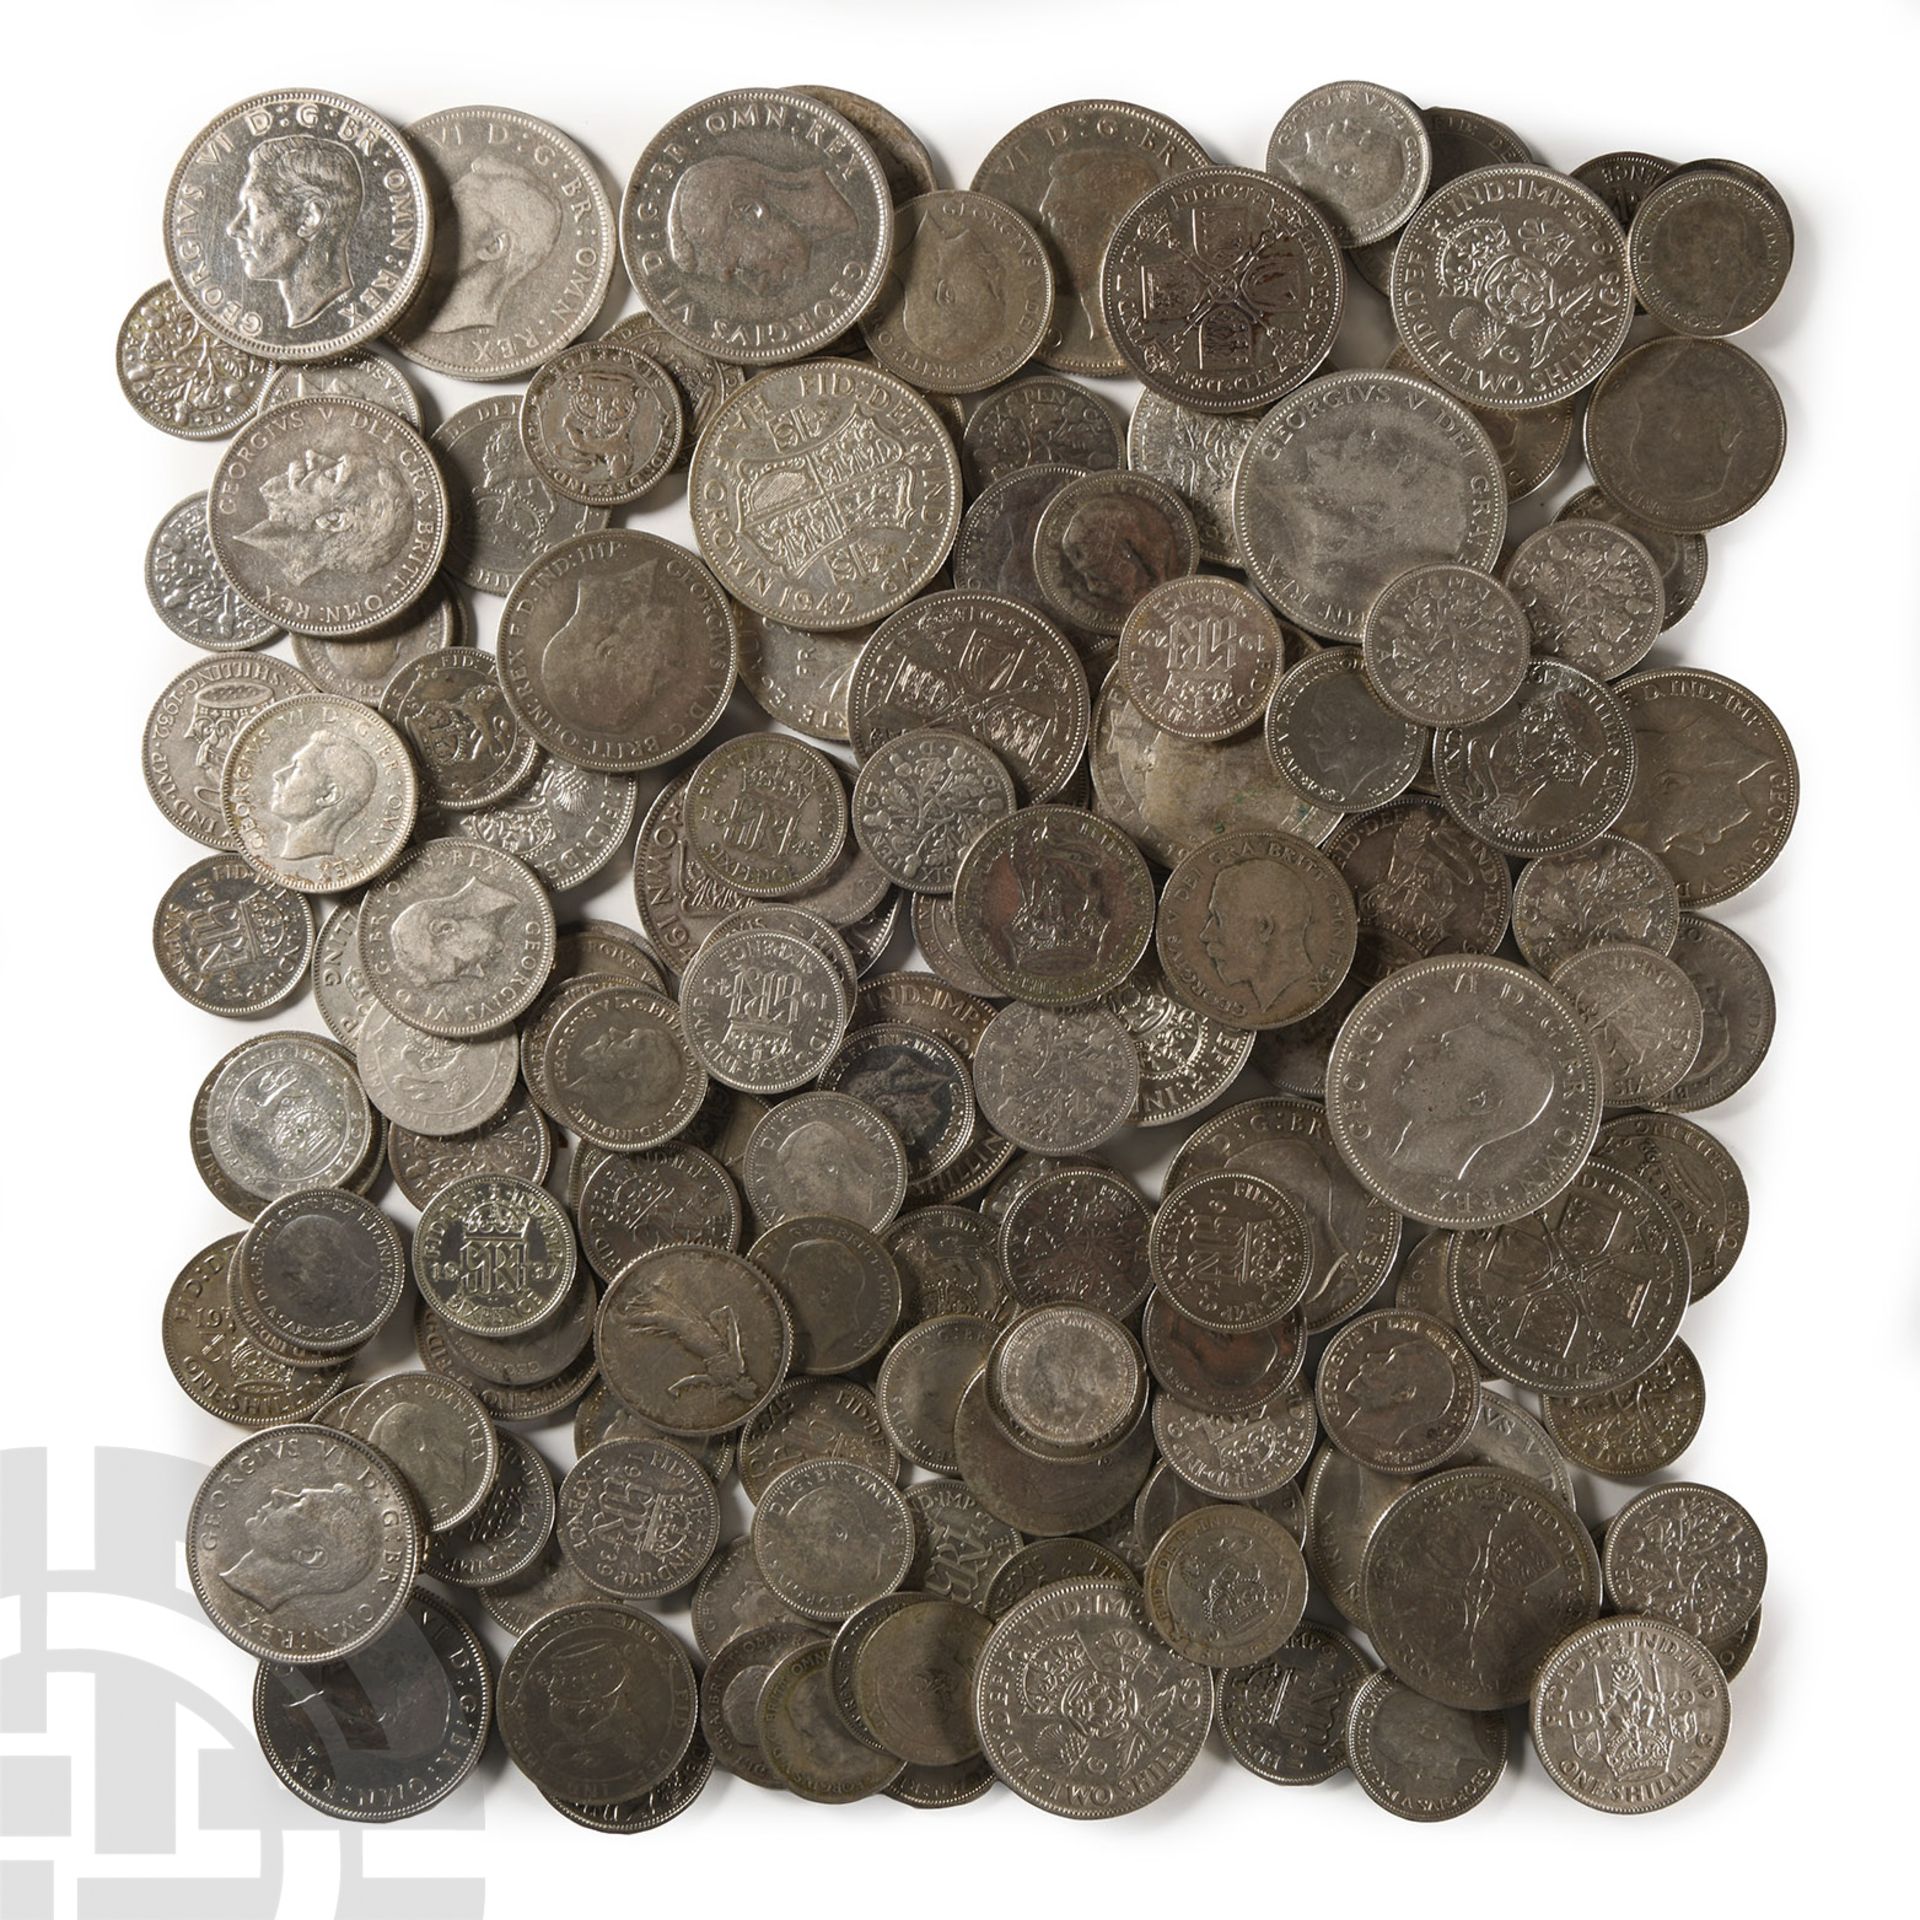 English Milled Coins - Pre-1947 Mixed Silver Coin Group [154]